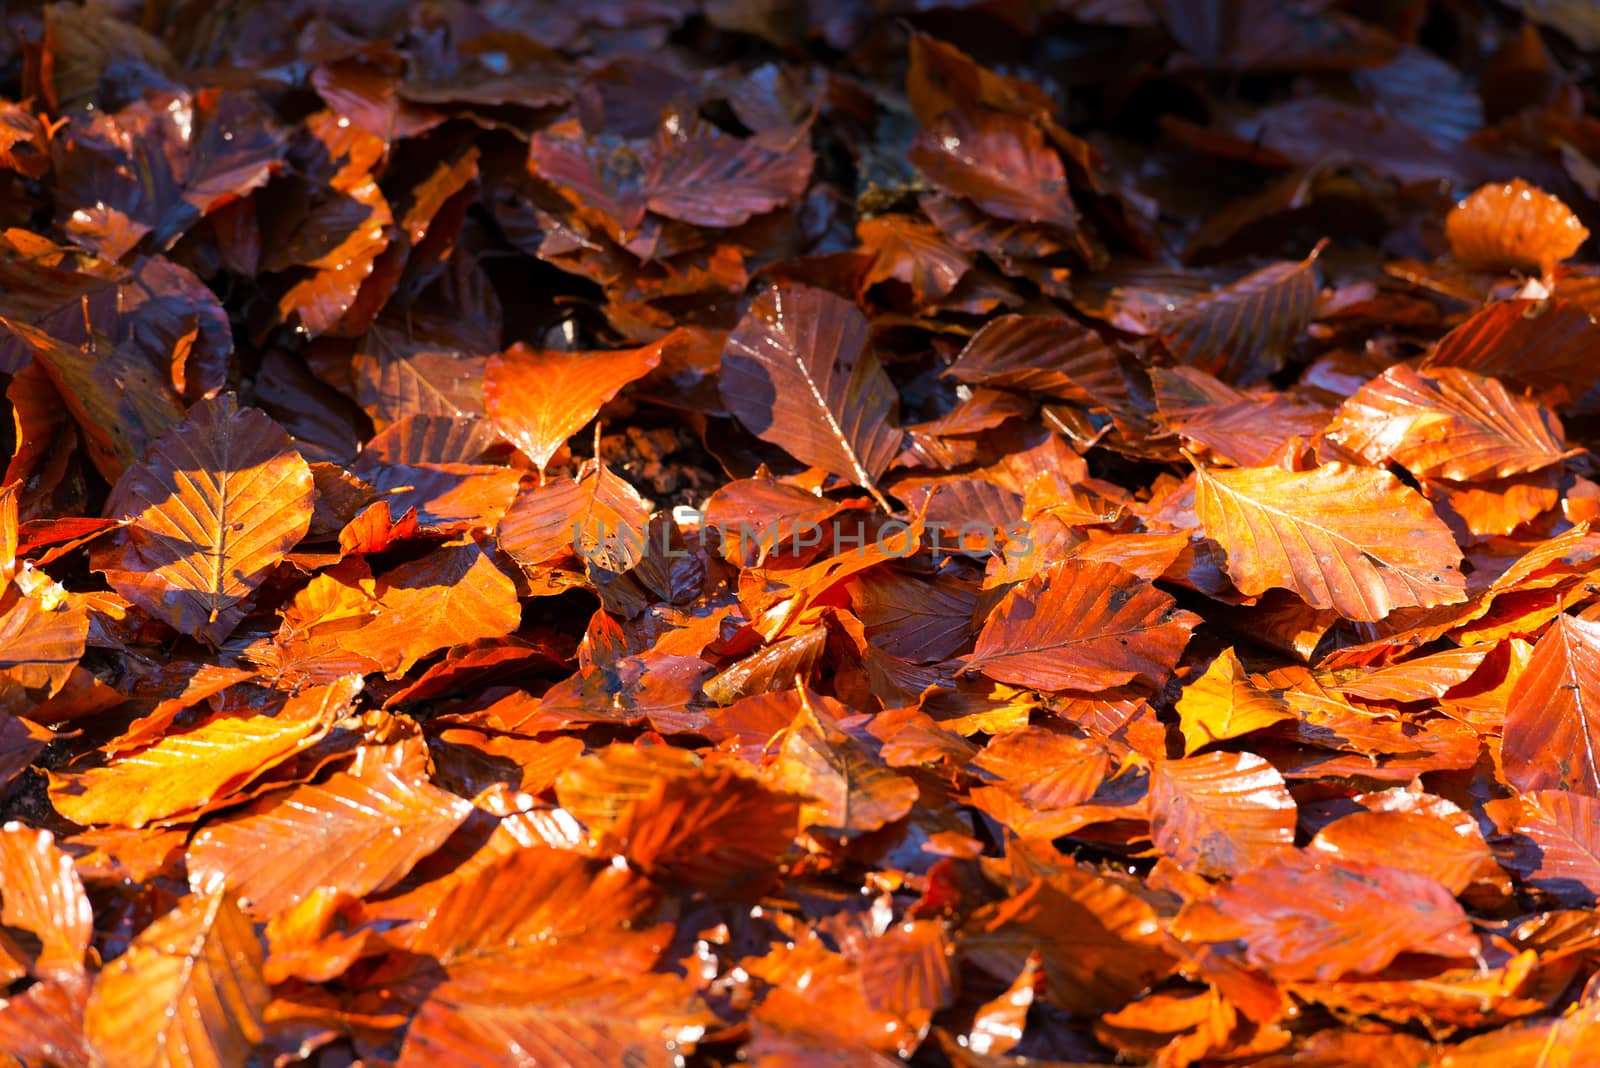 Wet Leaves in Autumn on the Ground by catalby